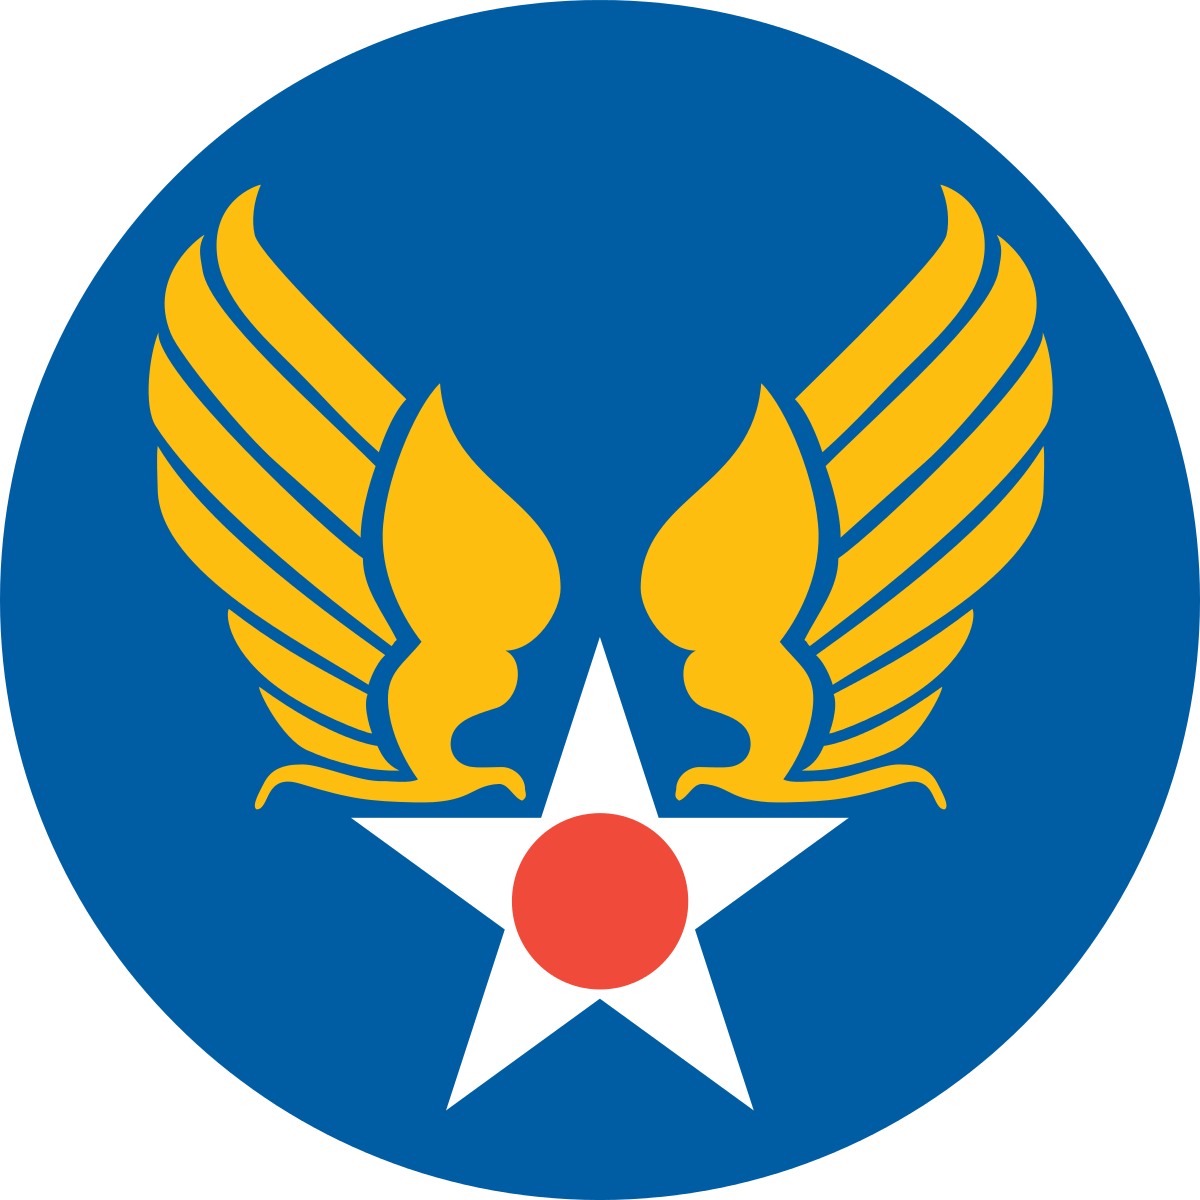 Italy Air Force Logo - United States Army Air Forces